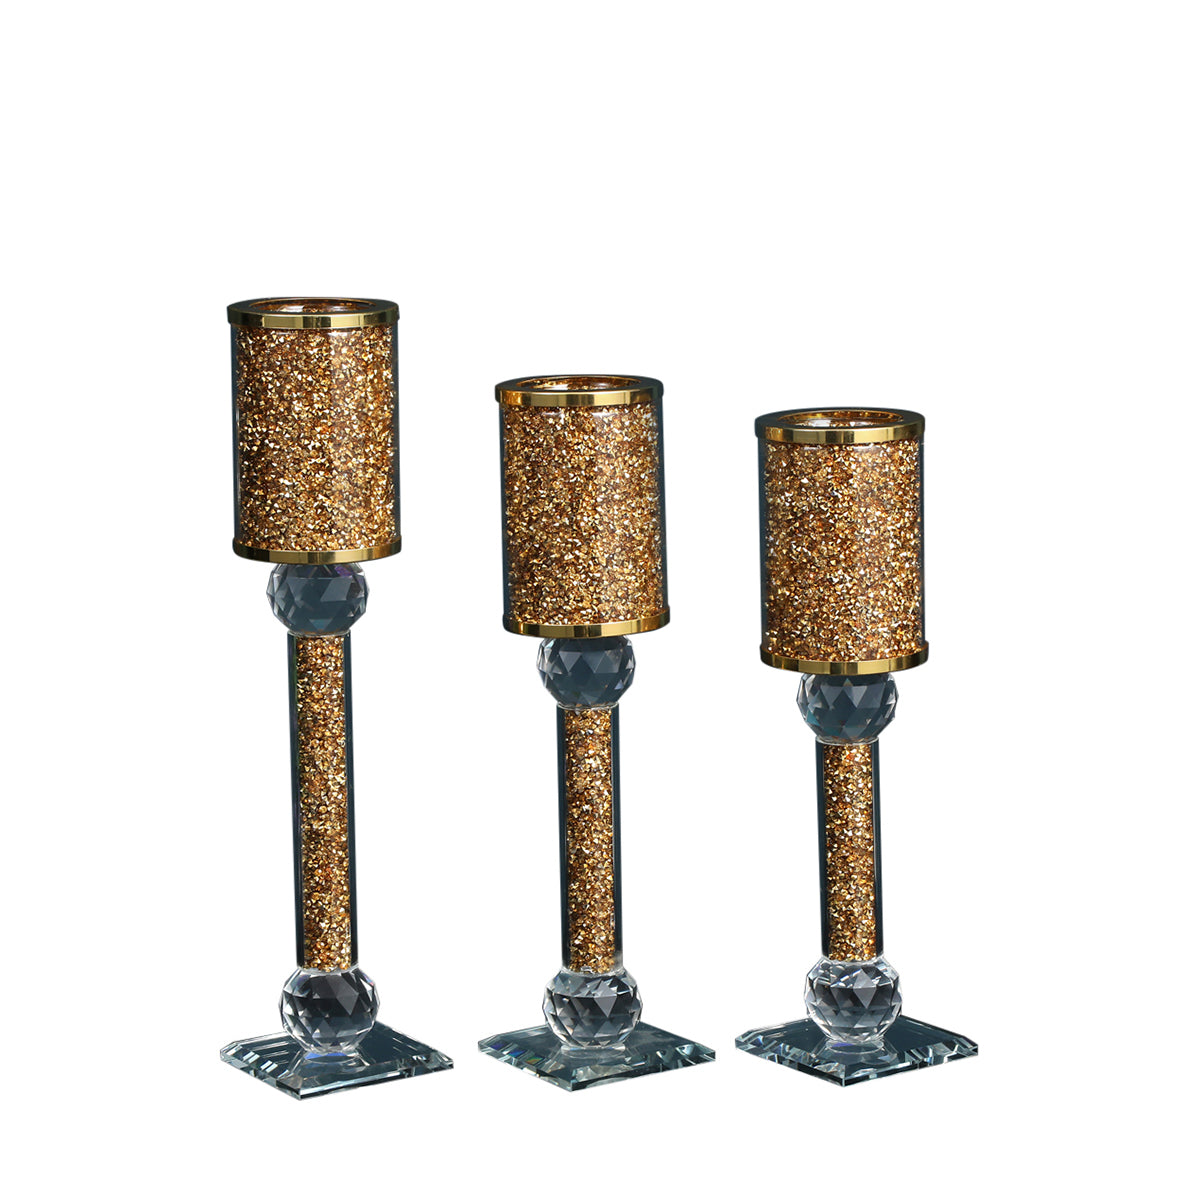 Ambrose Exquisite 3 Piece Candle Holder Set gold-glass